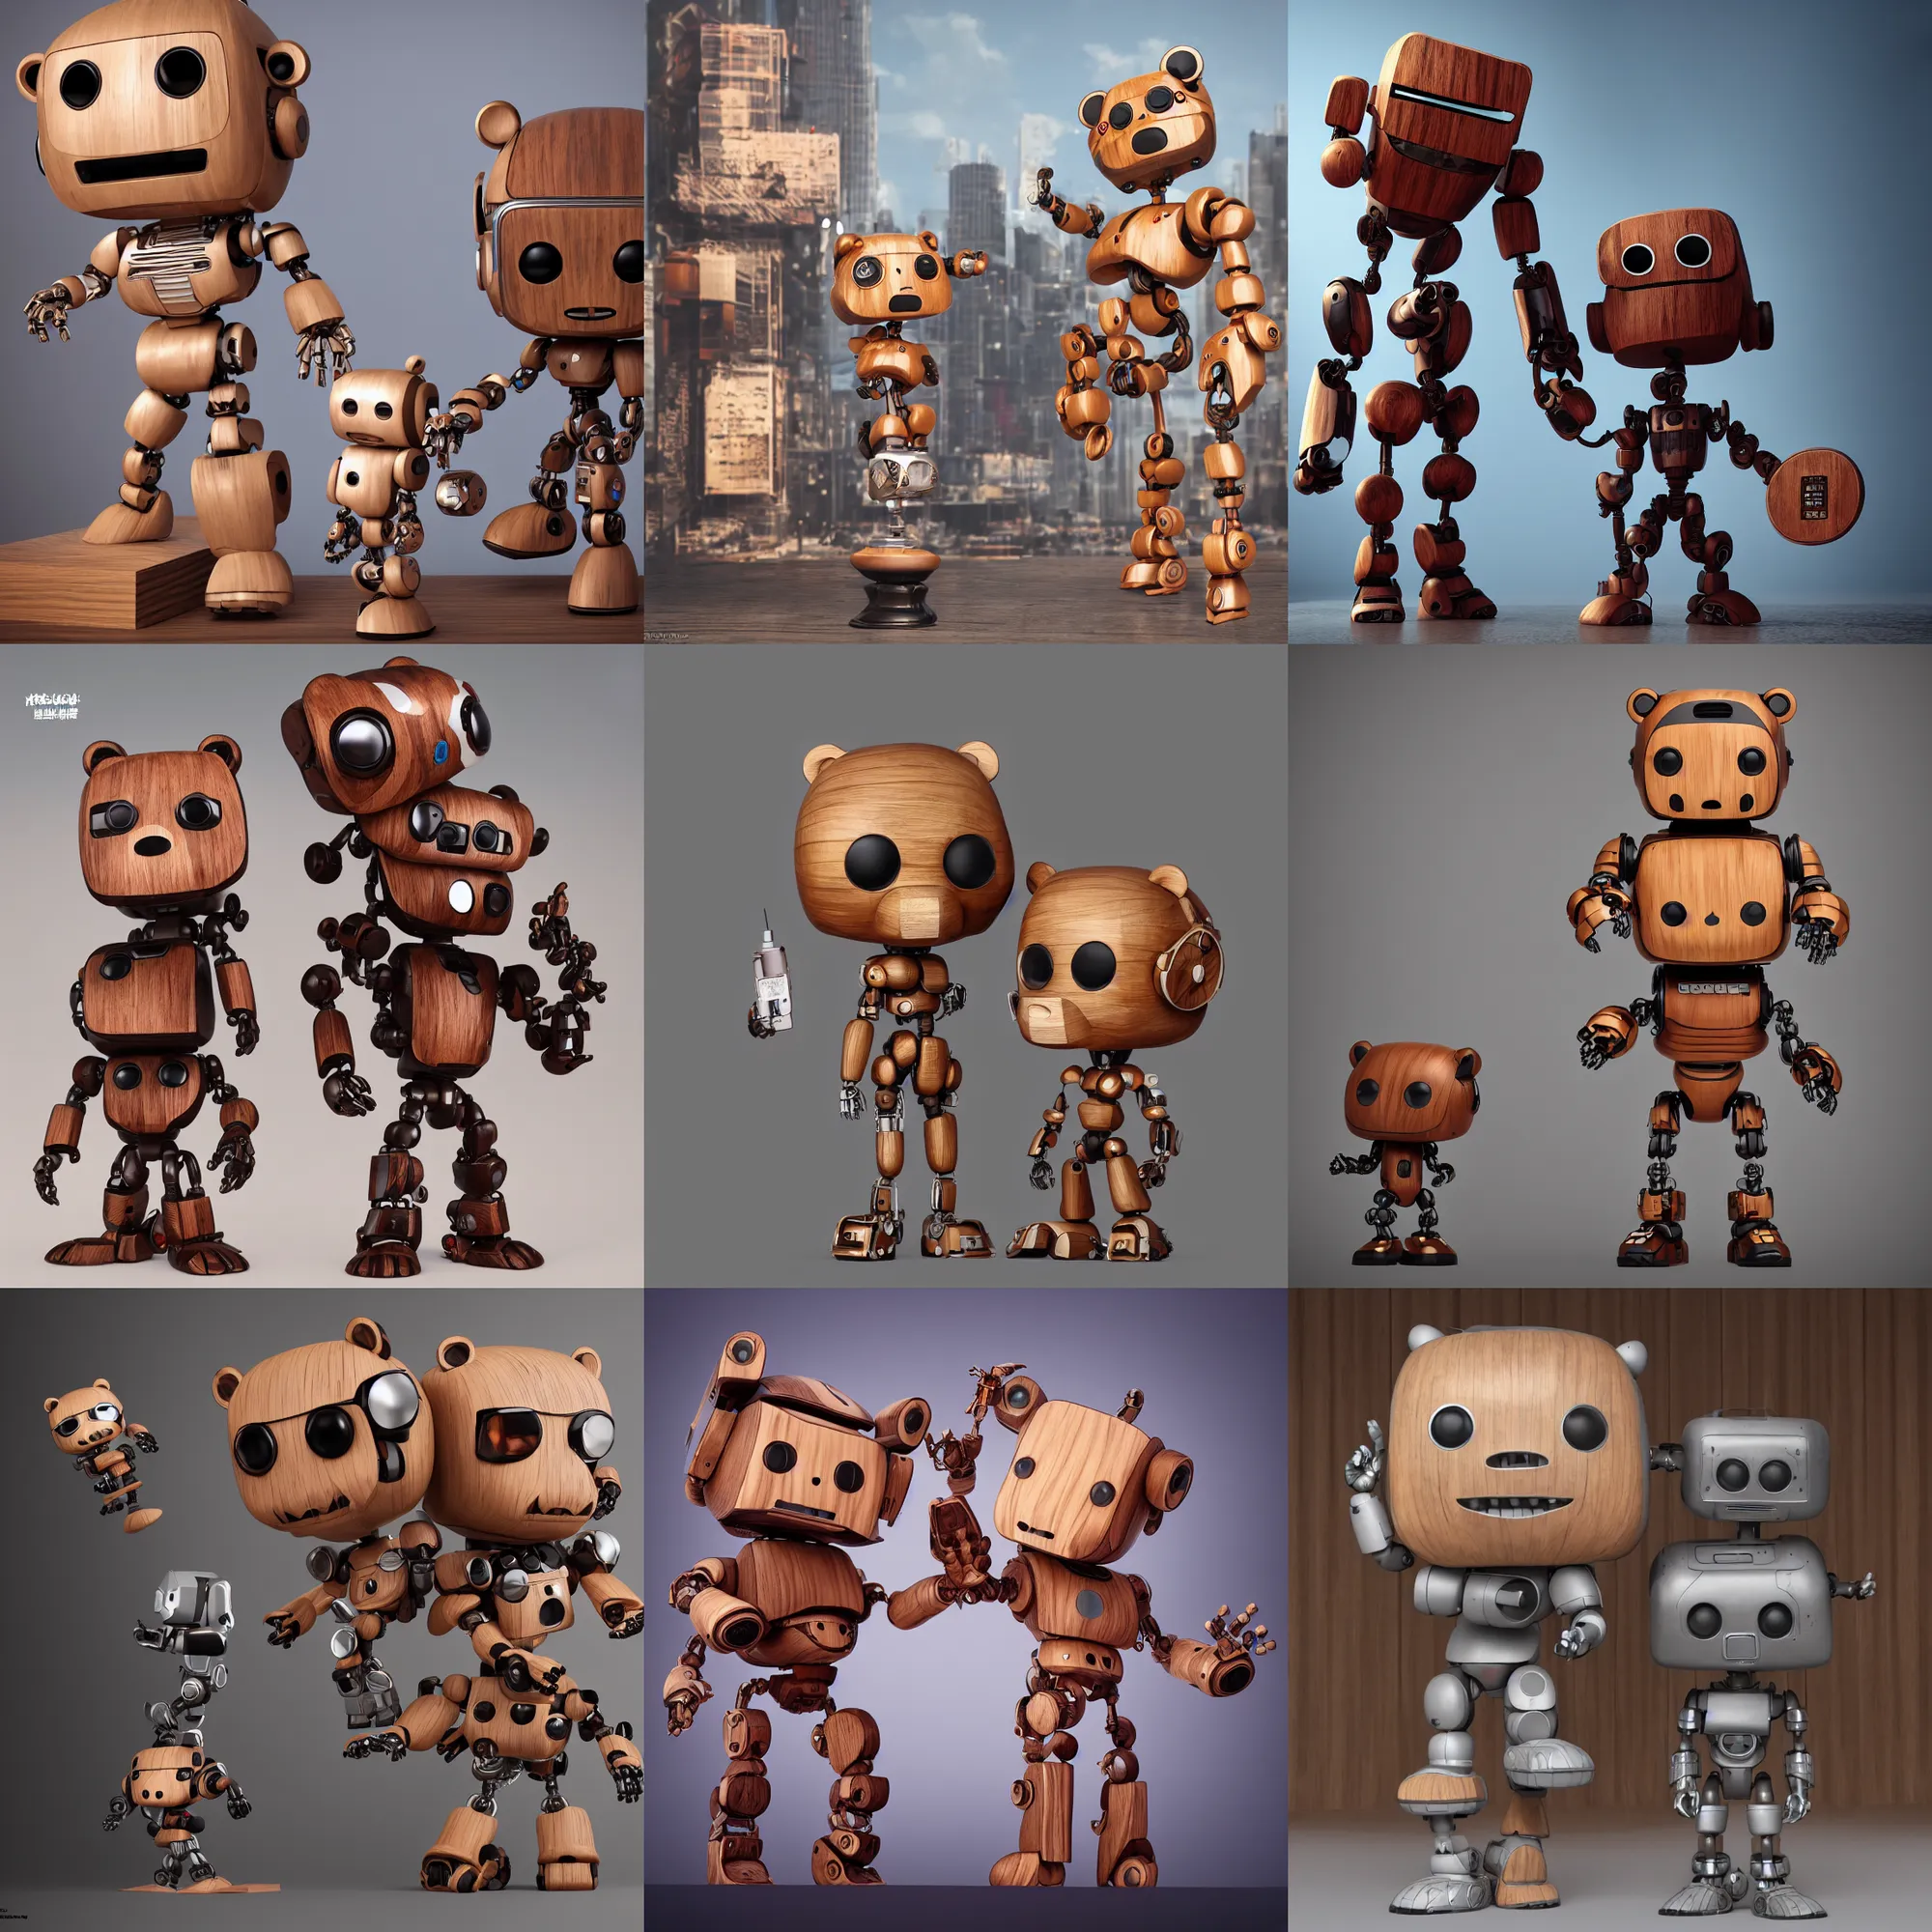 Prompt: 8 k octane render sculpture photorealistic beautiful character wooden design, art toys collectible figurine, mascot pop funko, very cute bear robot android cyberpunk, contemporary art gallery in background concept art cgsociety